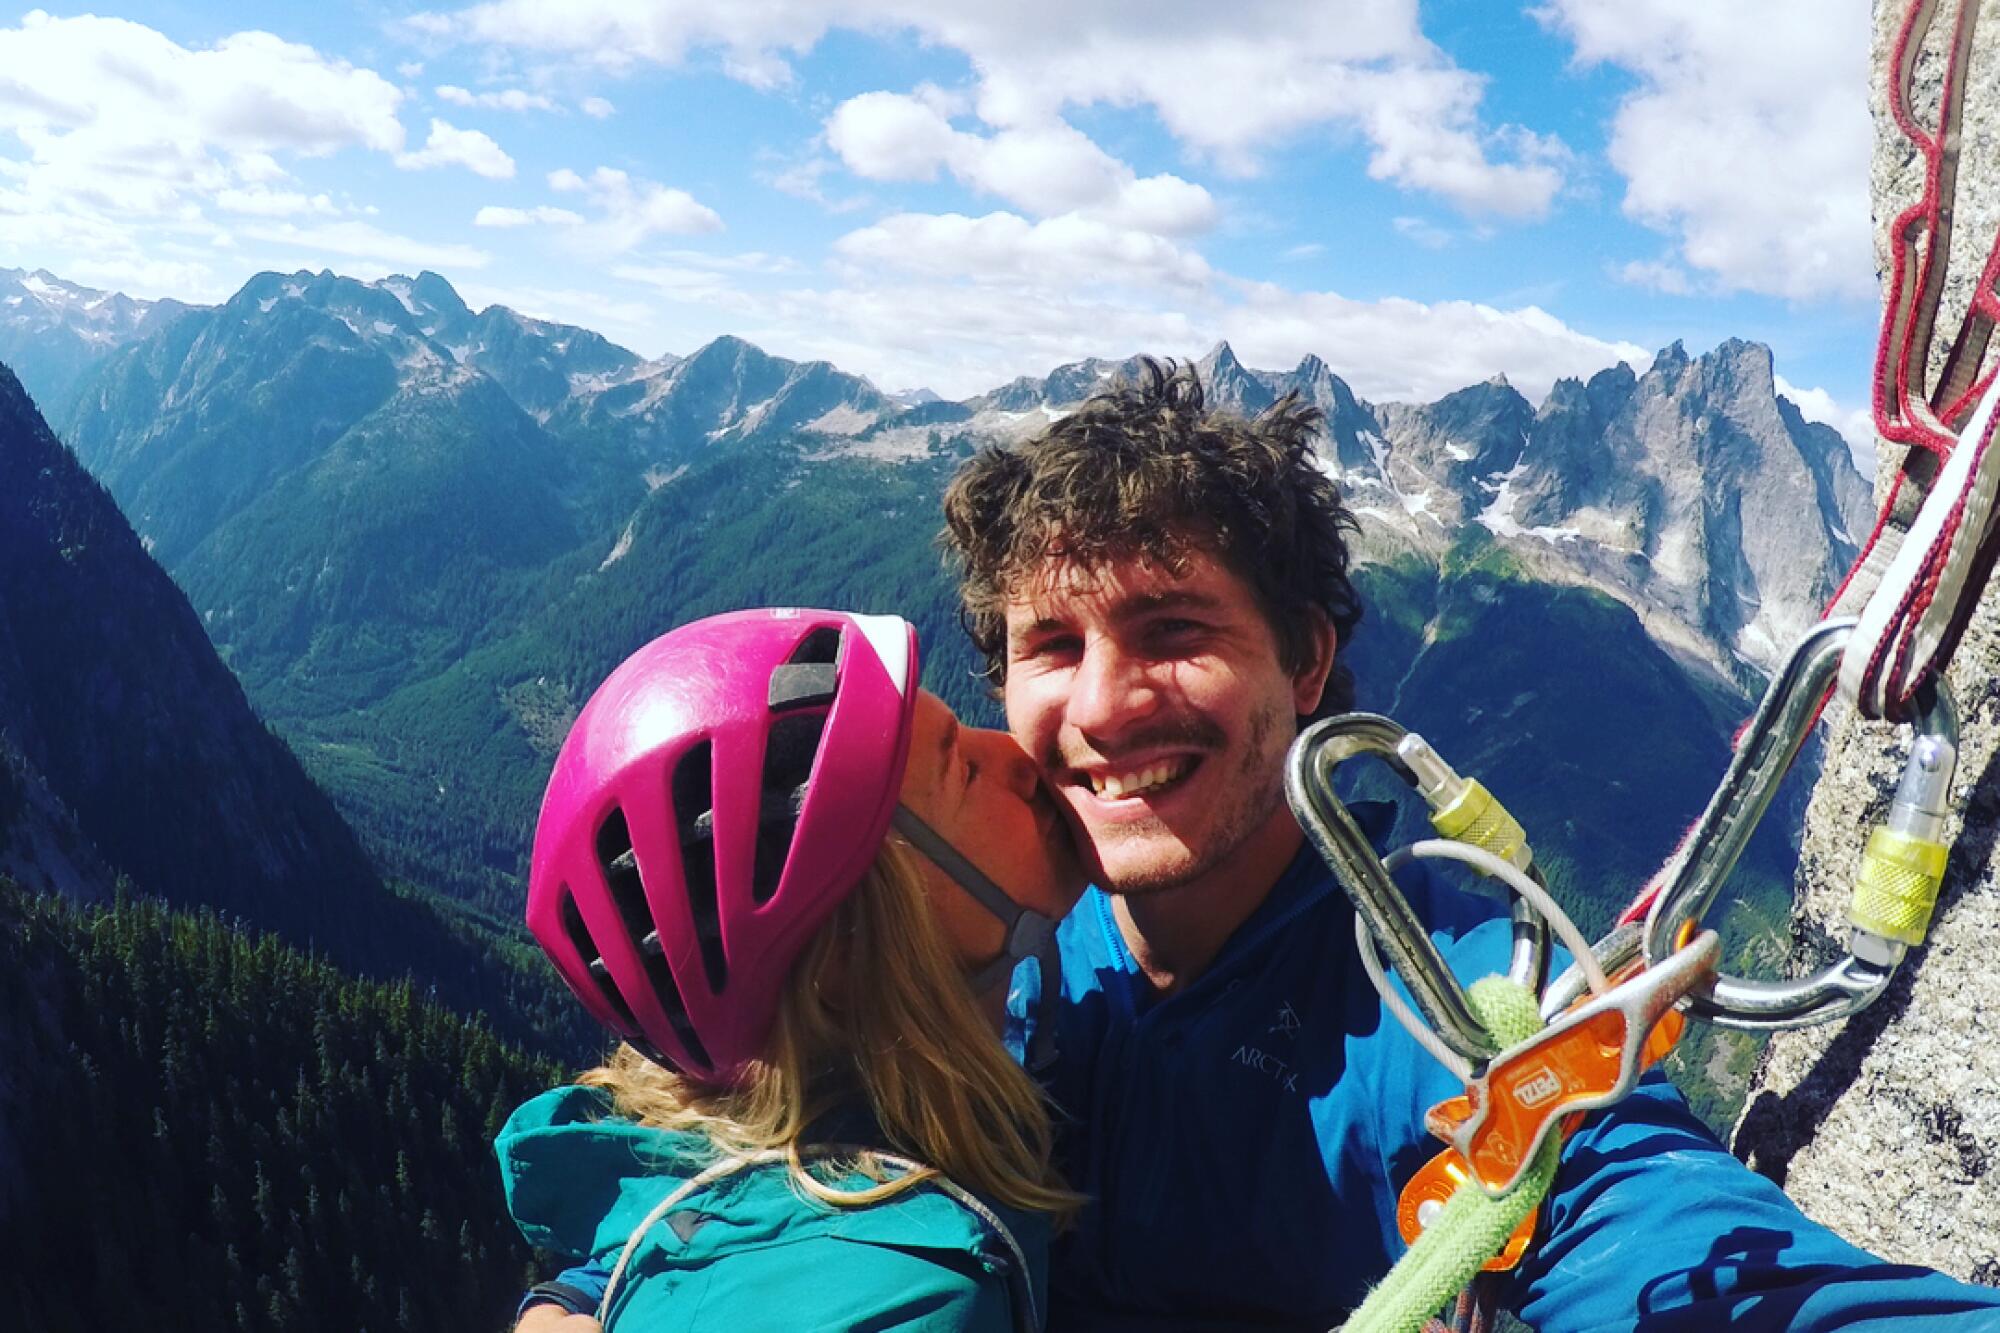 A woman wearing a pink helmet kisses a man as theyre both roped to the side of a mountain, with mountains in the background